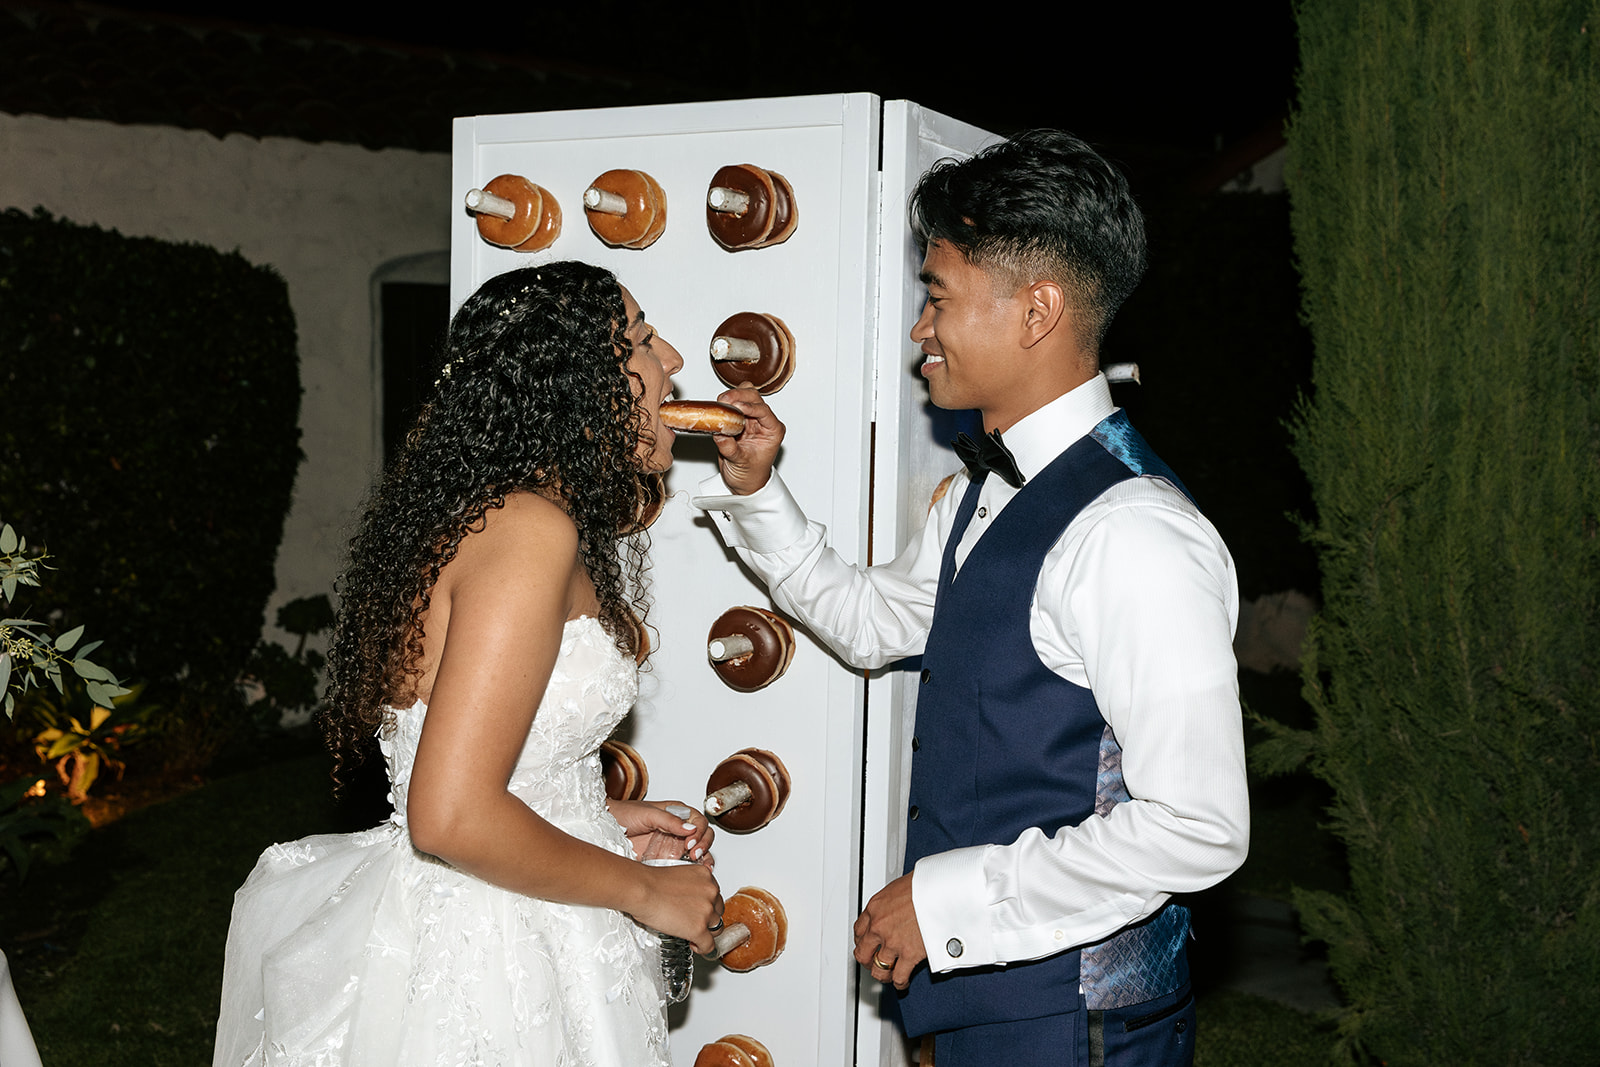 griffith house wedding anaheim california wedding donuts wedding cake taste test wedding cake cutting pictures dancing